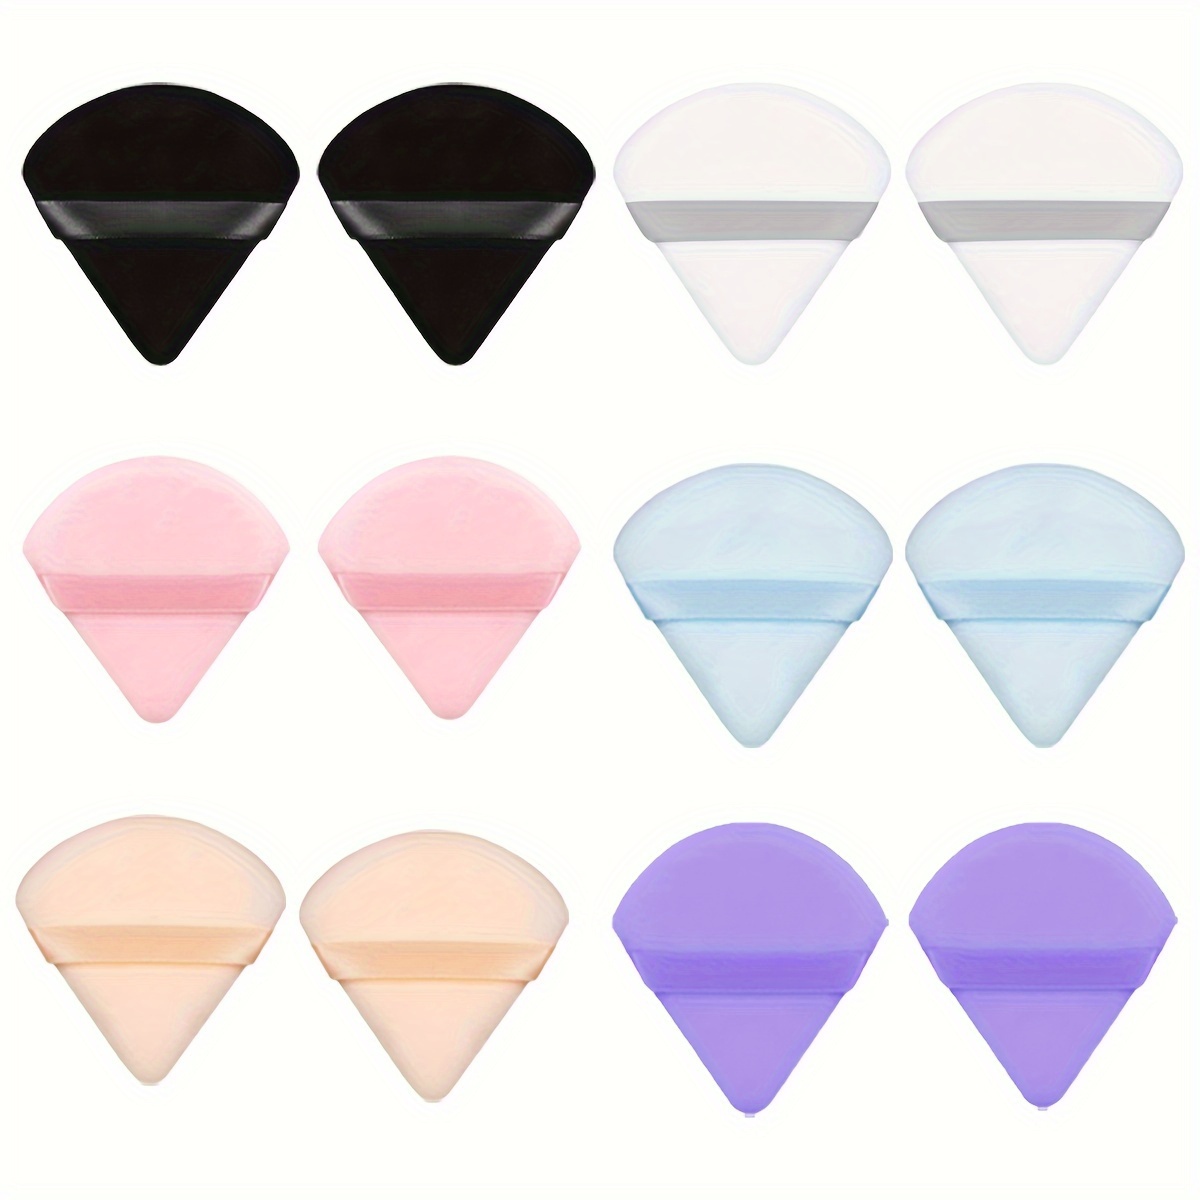 

Multi-purpose Triangular Makeup Sponges Set Of 2 - Gentle Hydrophilic Pu Cosmetic Blenders, Unscented, Soft Finger Powder Puffs For Foundation And Concealer Application